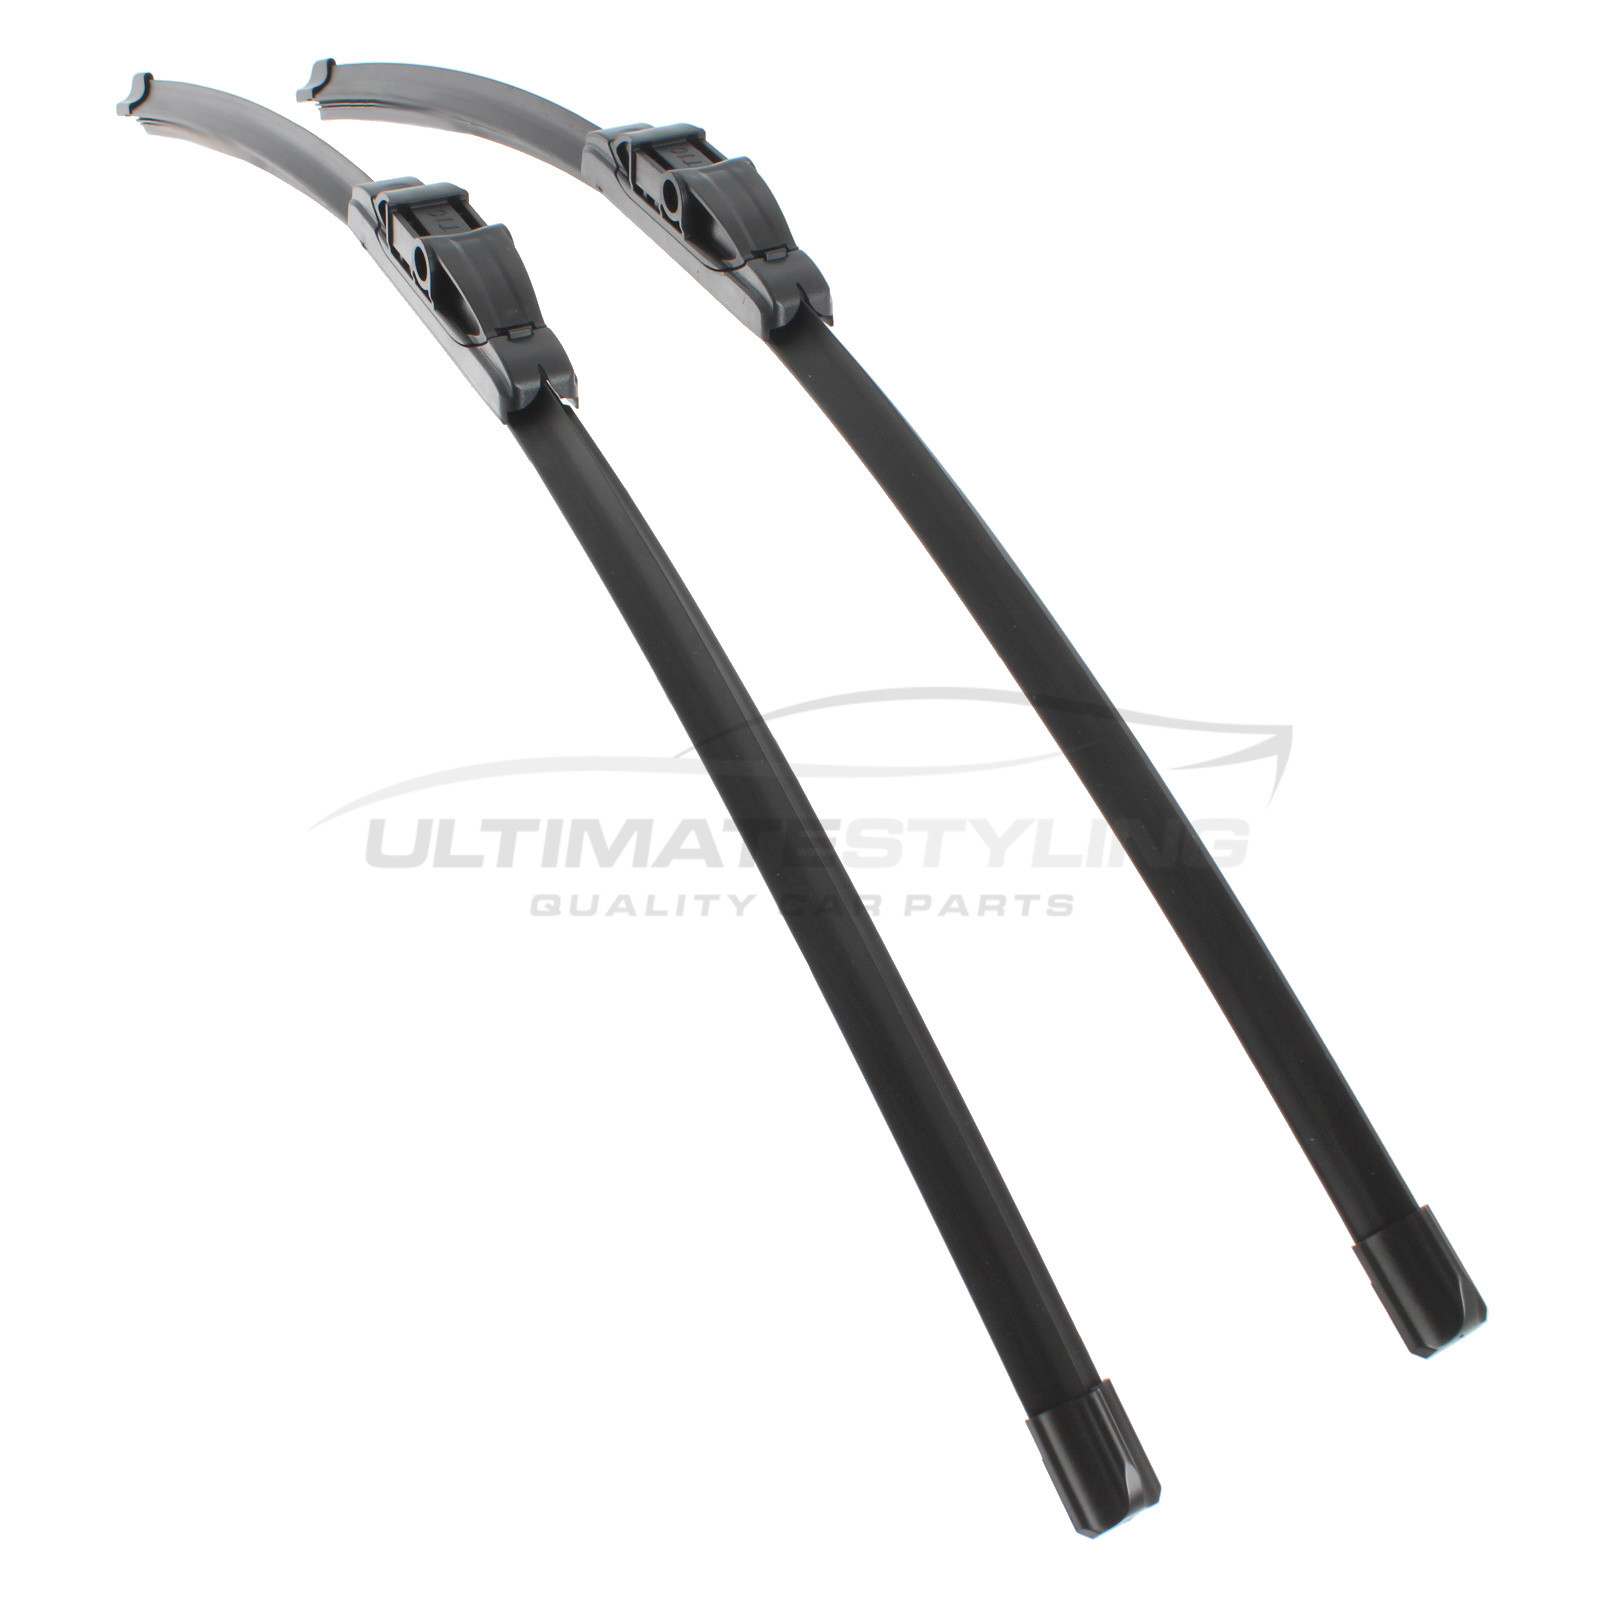 Drivers Side & Passenger Side (Front) Wiper Blades for VW Touareg